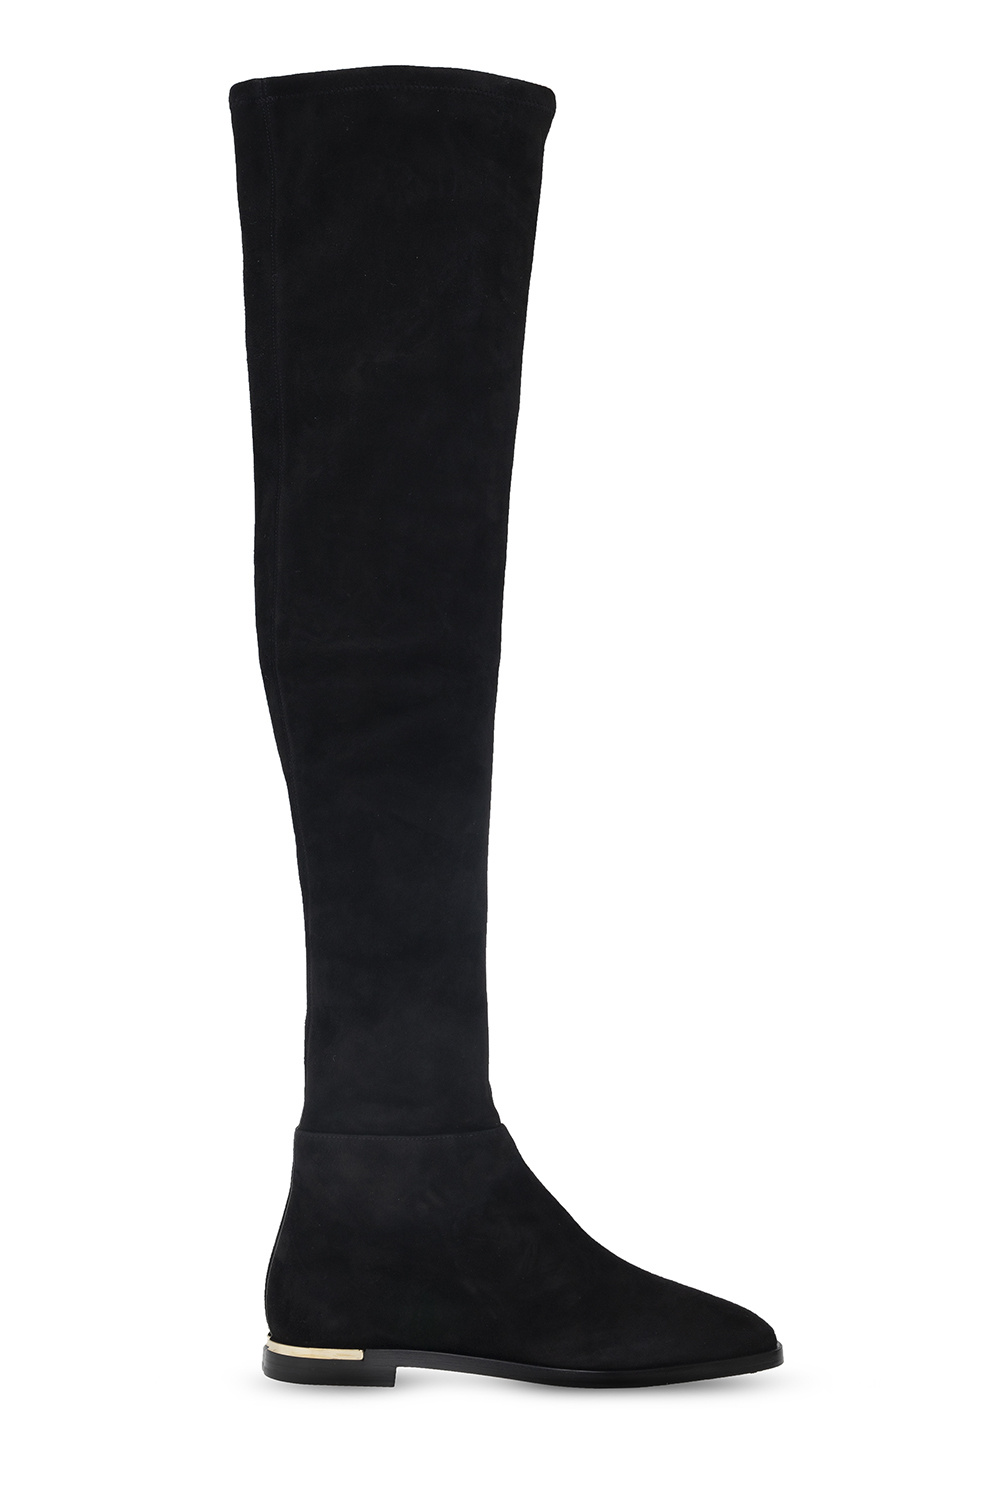 Jimmy Choo ‘Palina’ over-the-knee boots